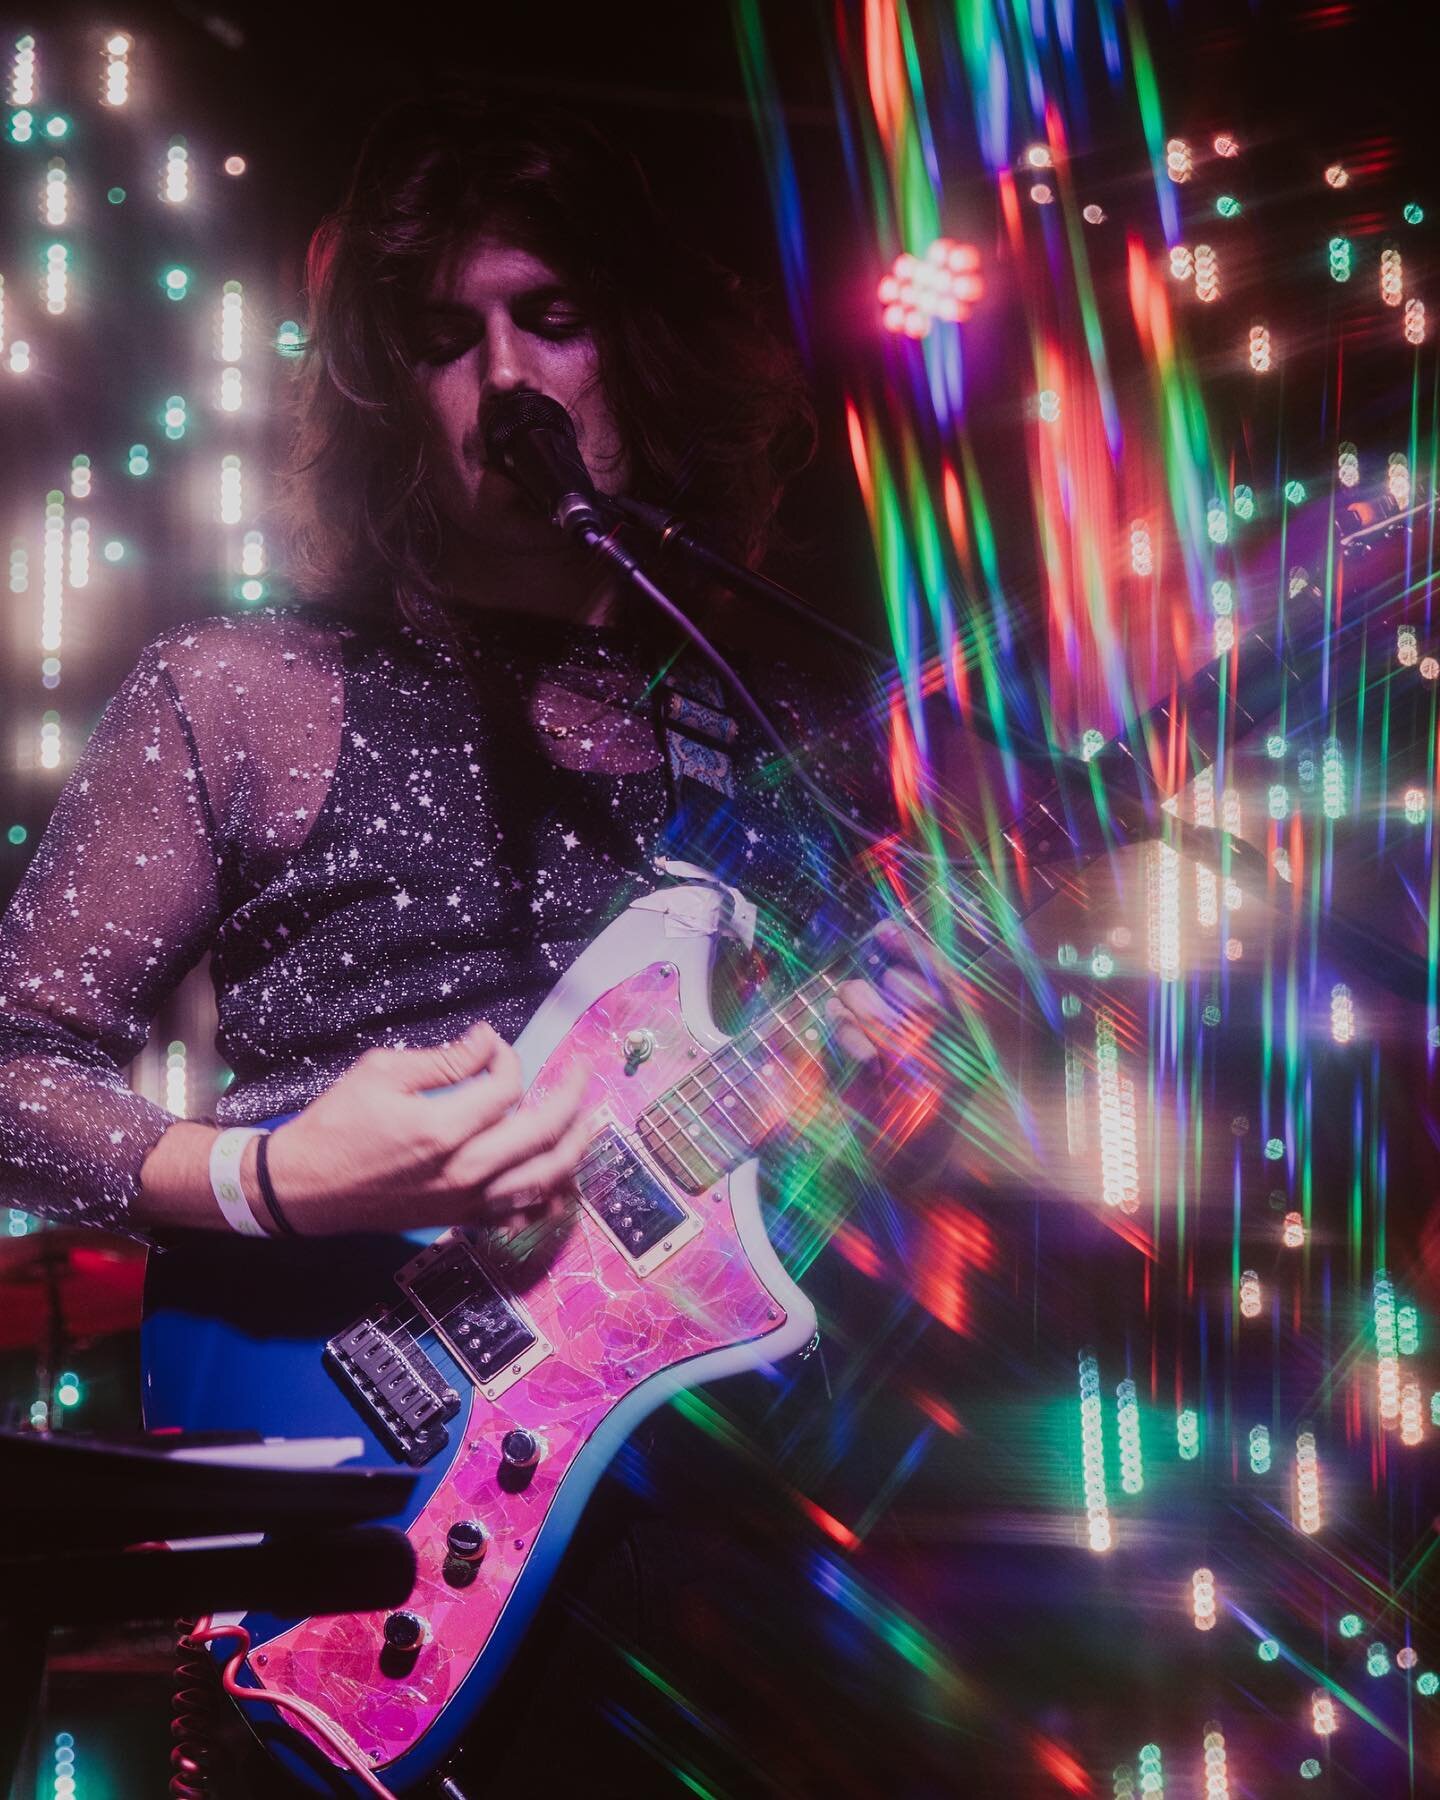 Spaceface took Denver to another dimension this week. ✨